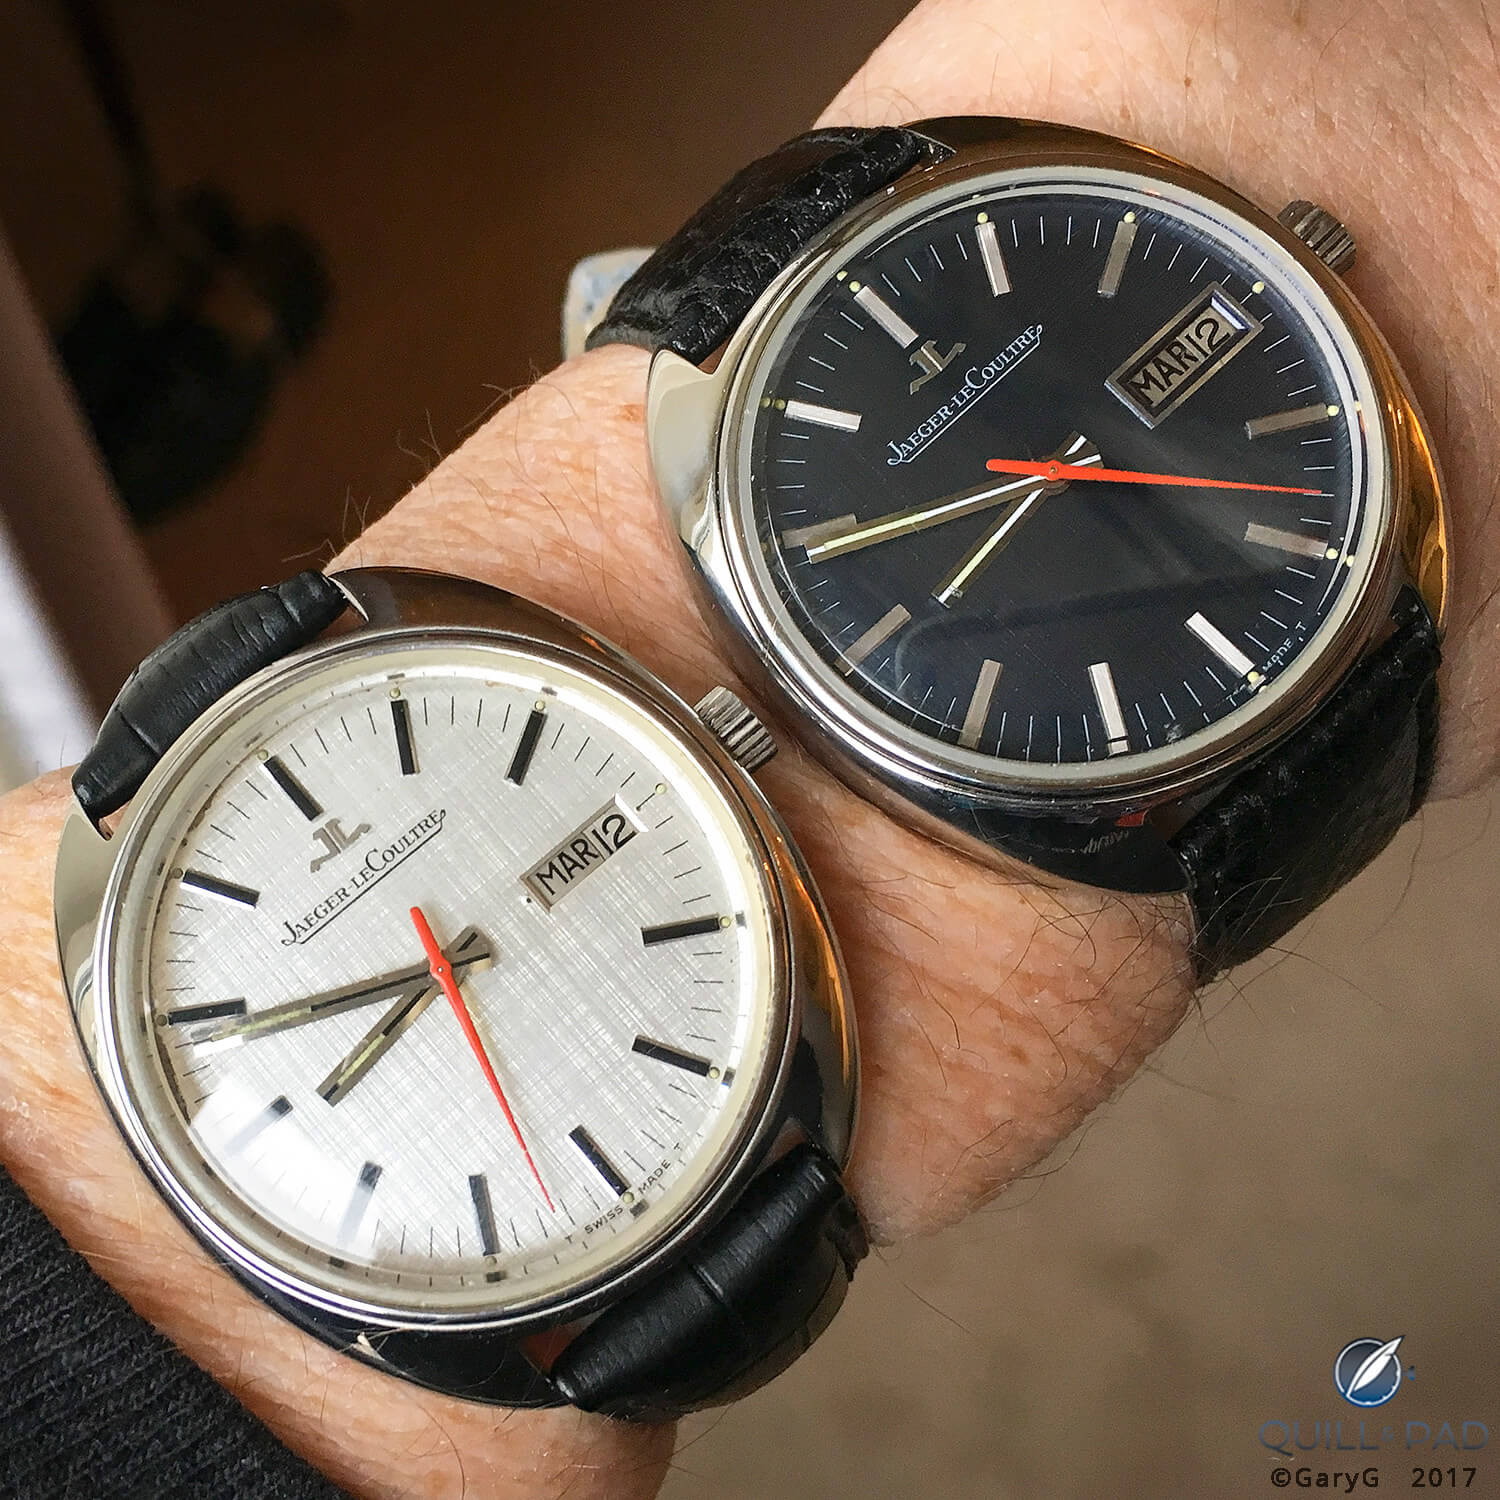 Matched pair: prototype Jaeger-LeCoultre Caliber 906 watches